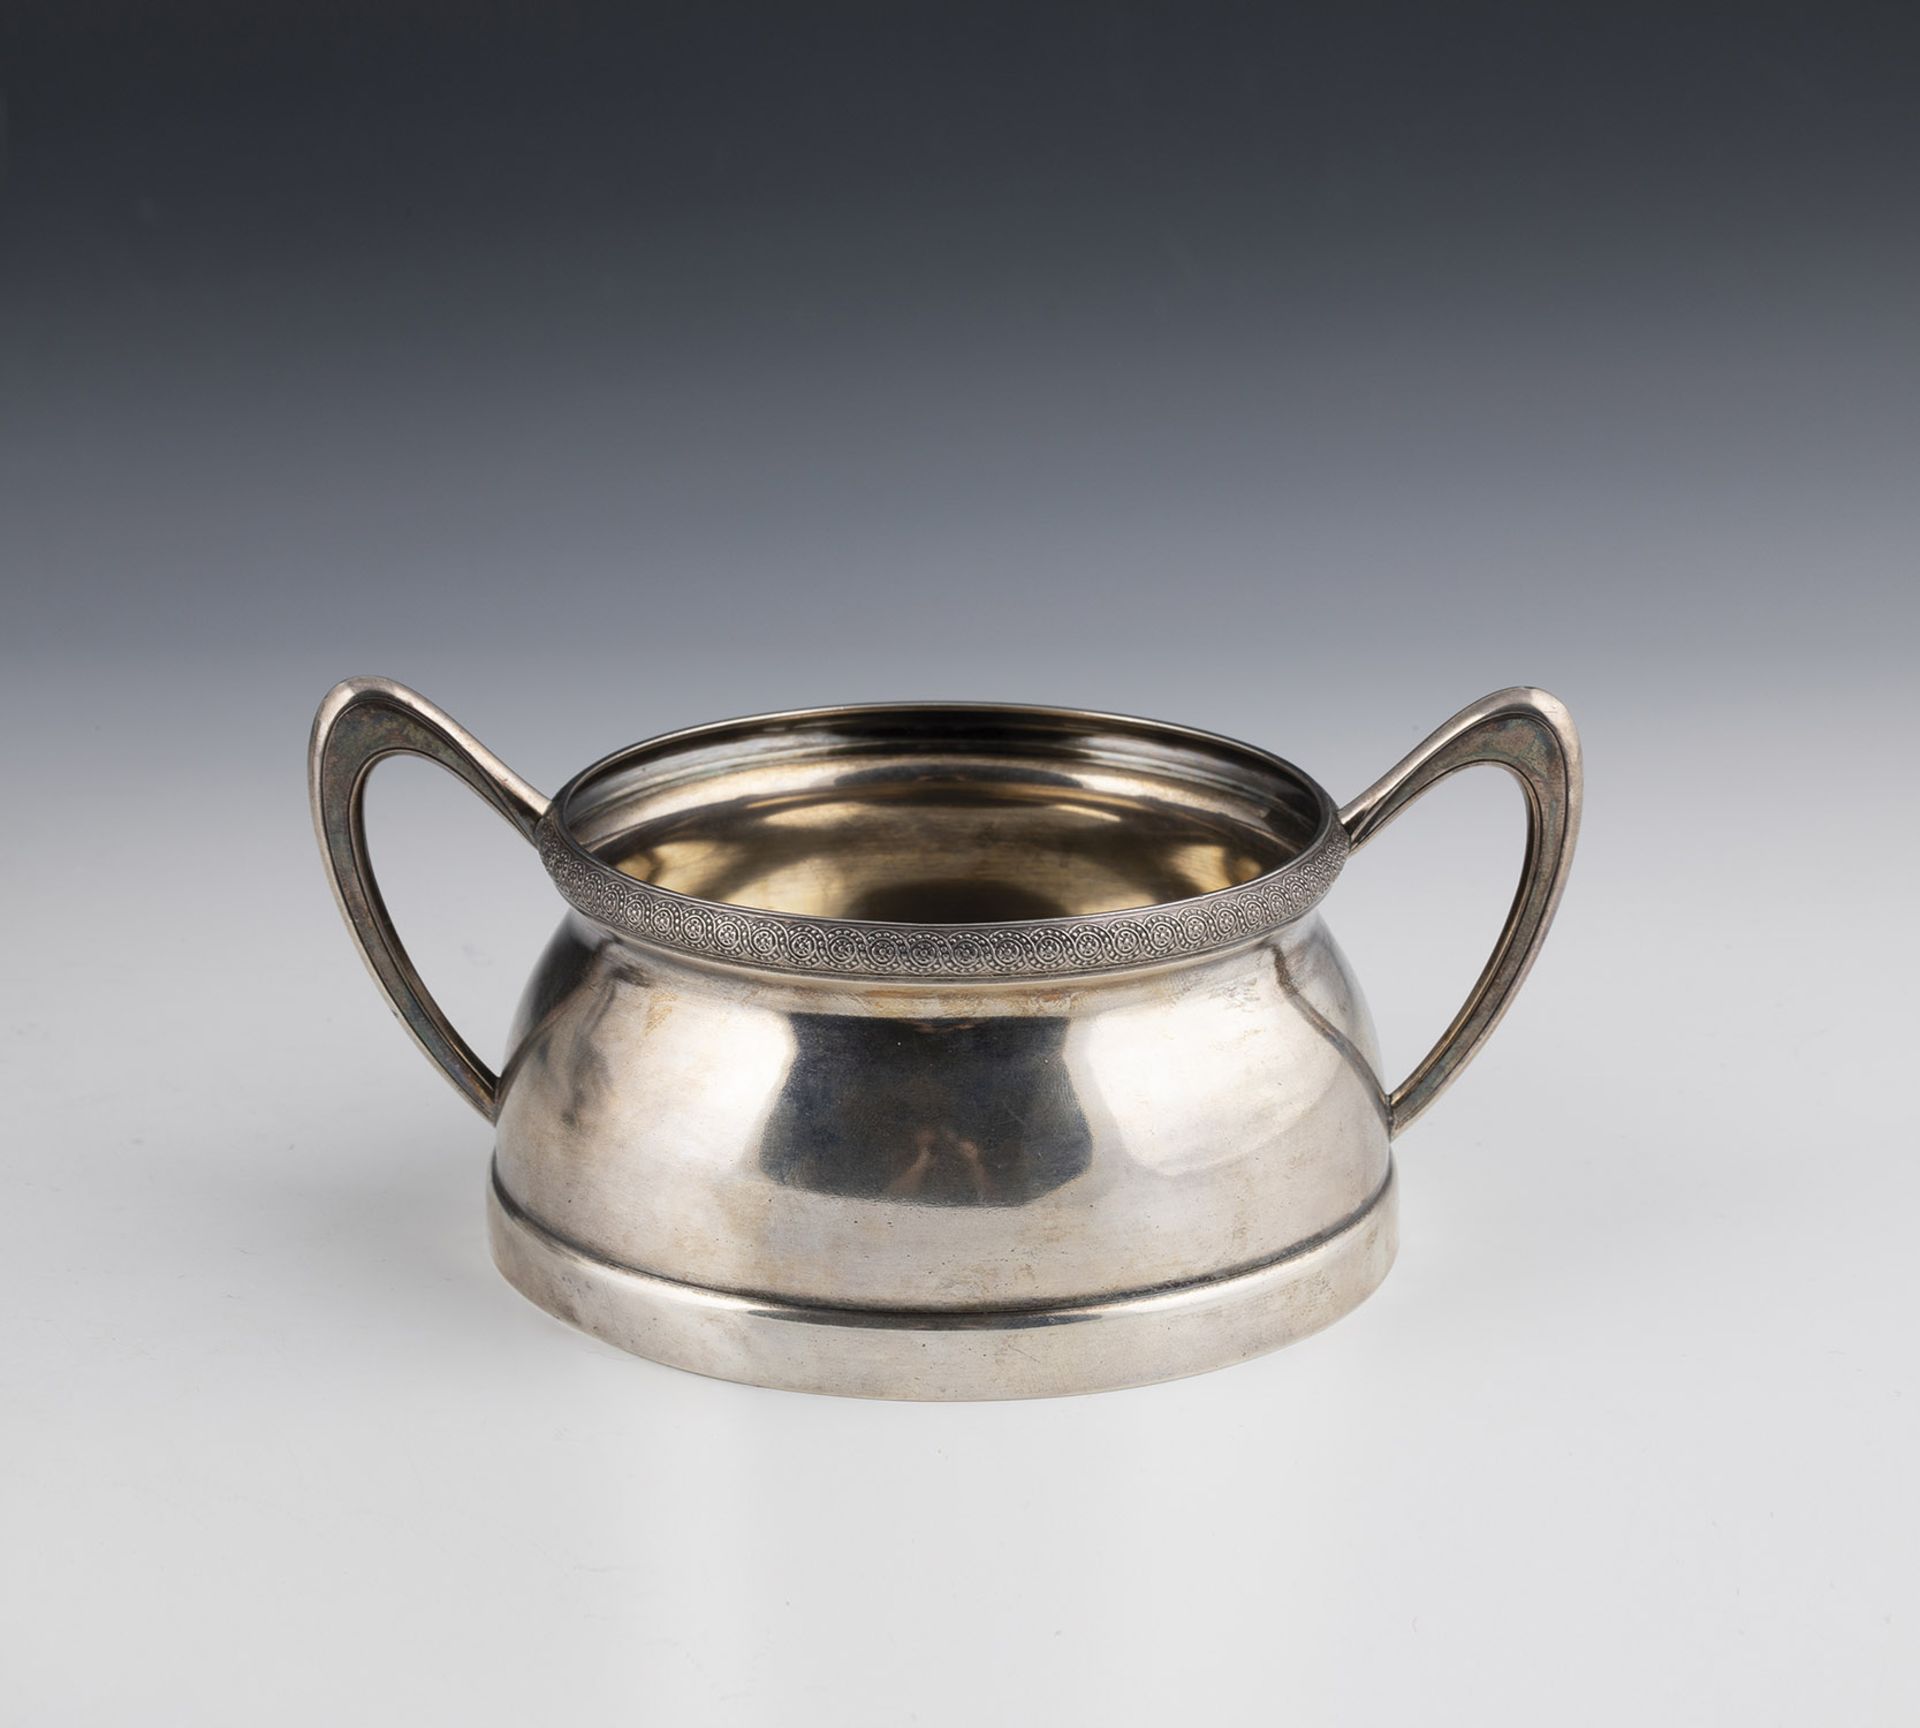 Sugar bowl with two handles